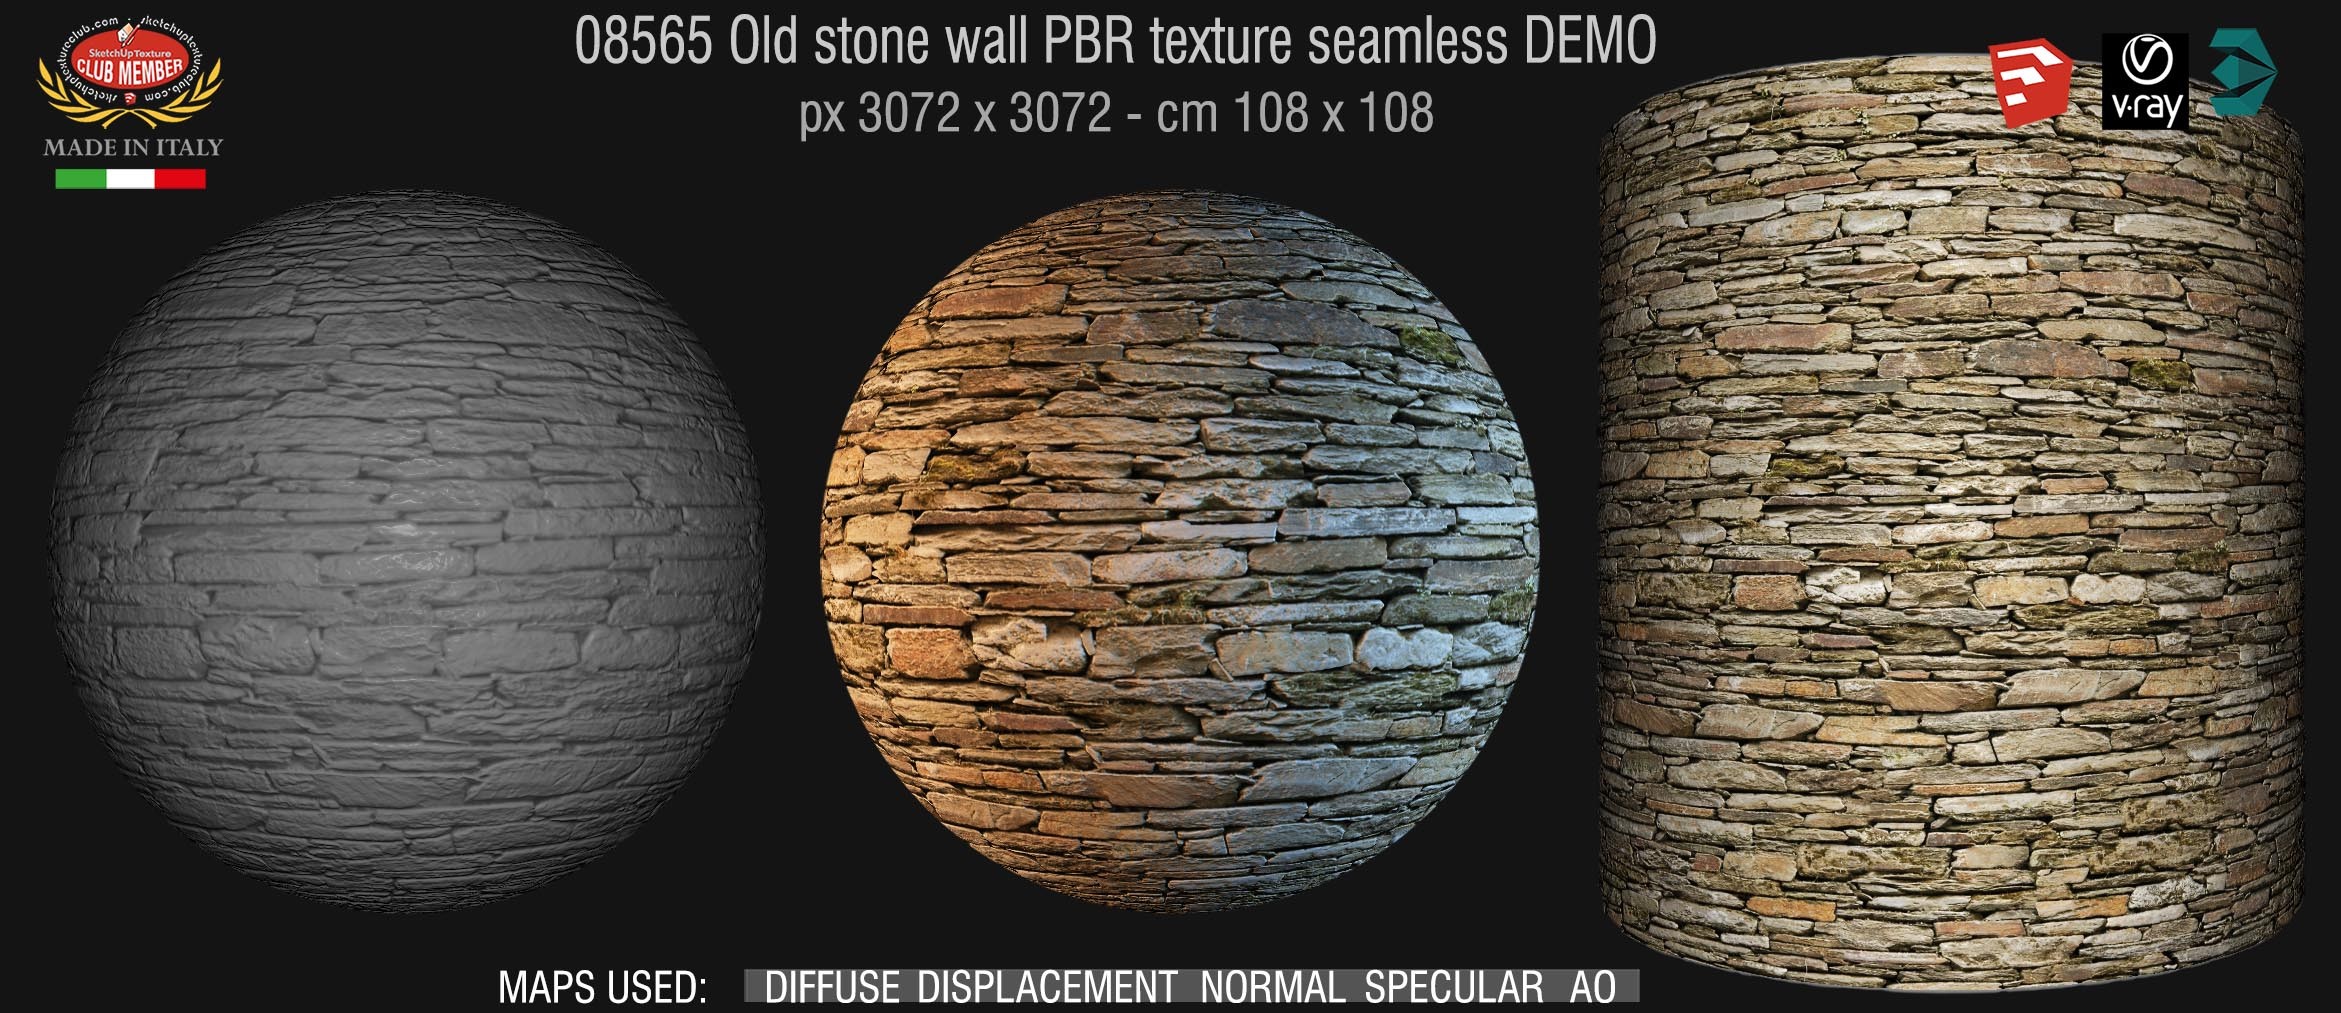 08565 Old stone wall PBR texture seamless DEMO